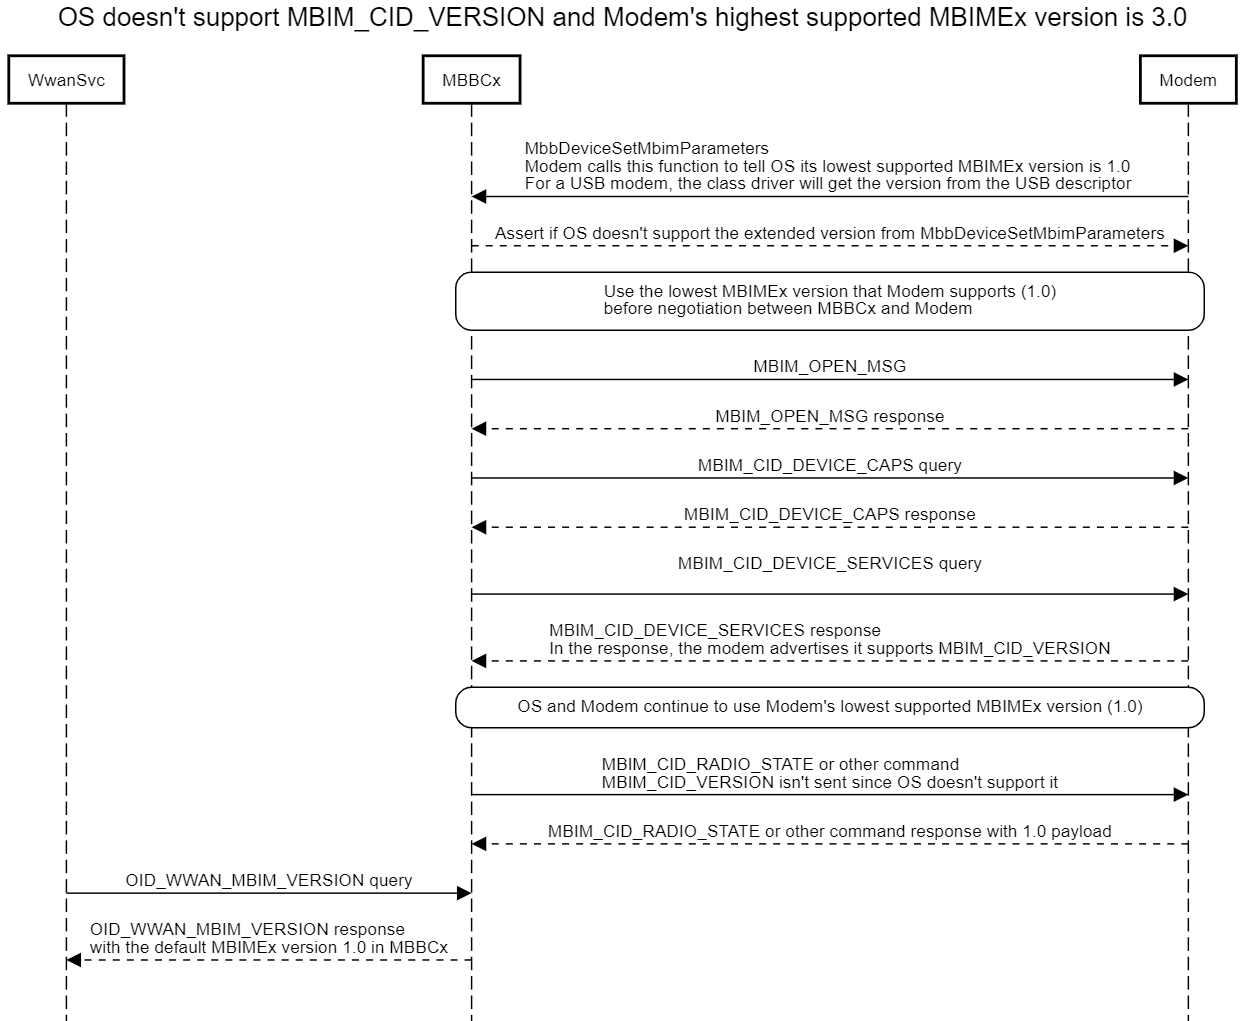 Diagram showing OS without MBIM_CID_VERSION support and modem's highest supported MBIMEx version is 3.0.